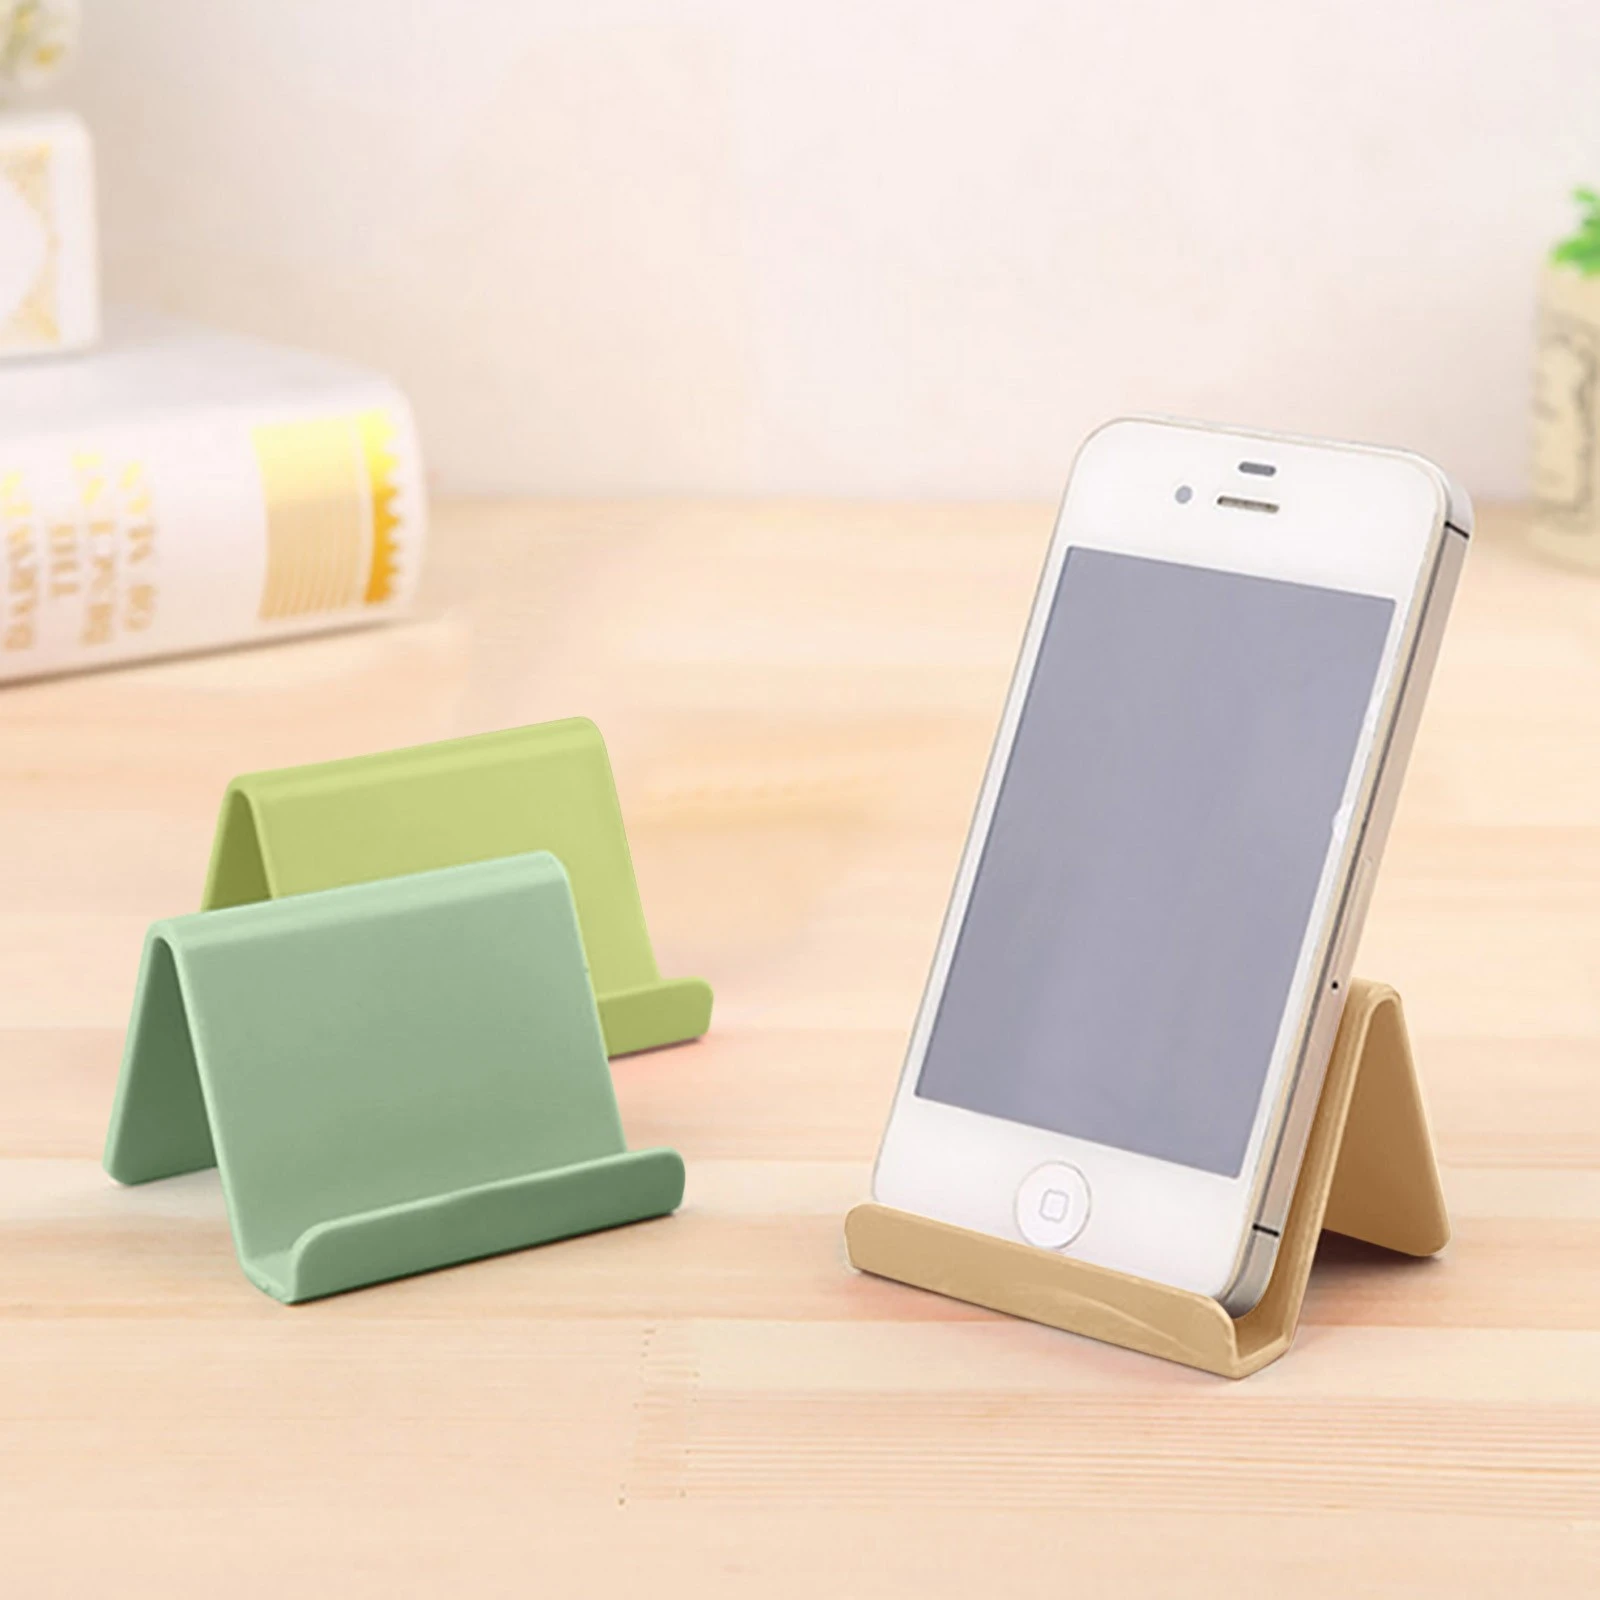 wooden phone stand Universal mobile phone Holder Tablet Stand For iPhone Xiaomi Huawei Samsung holders Candy Portable Mobile accessories Support phone stand for car